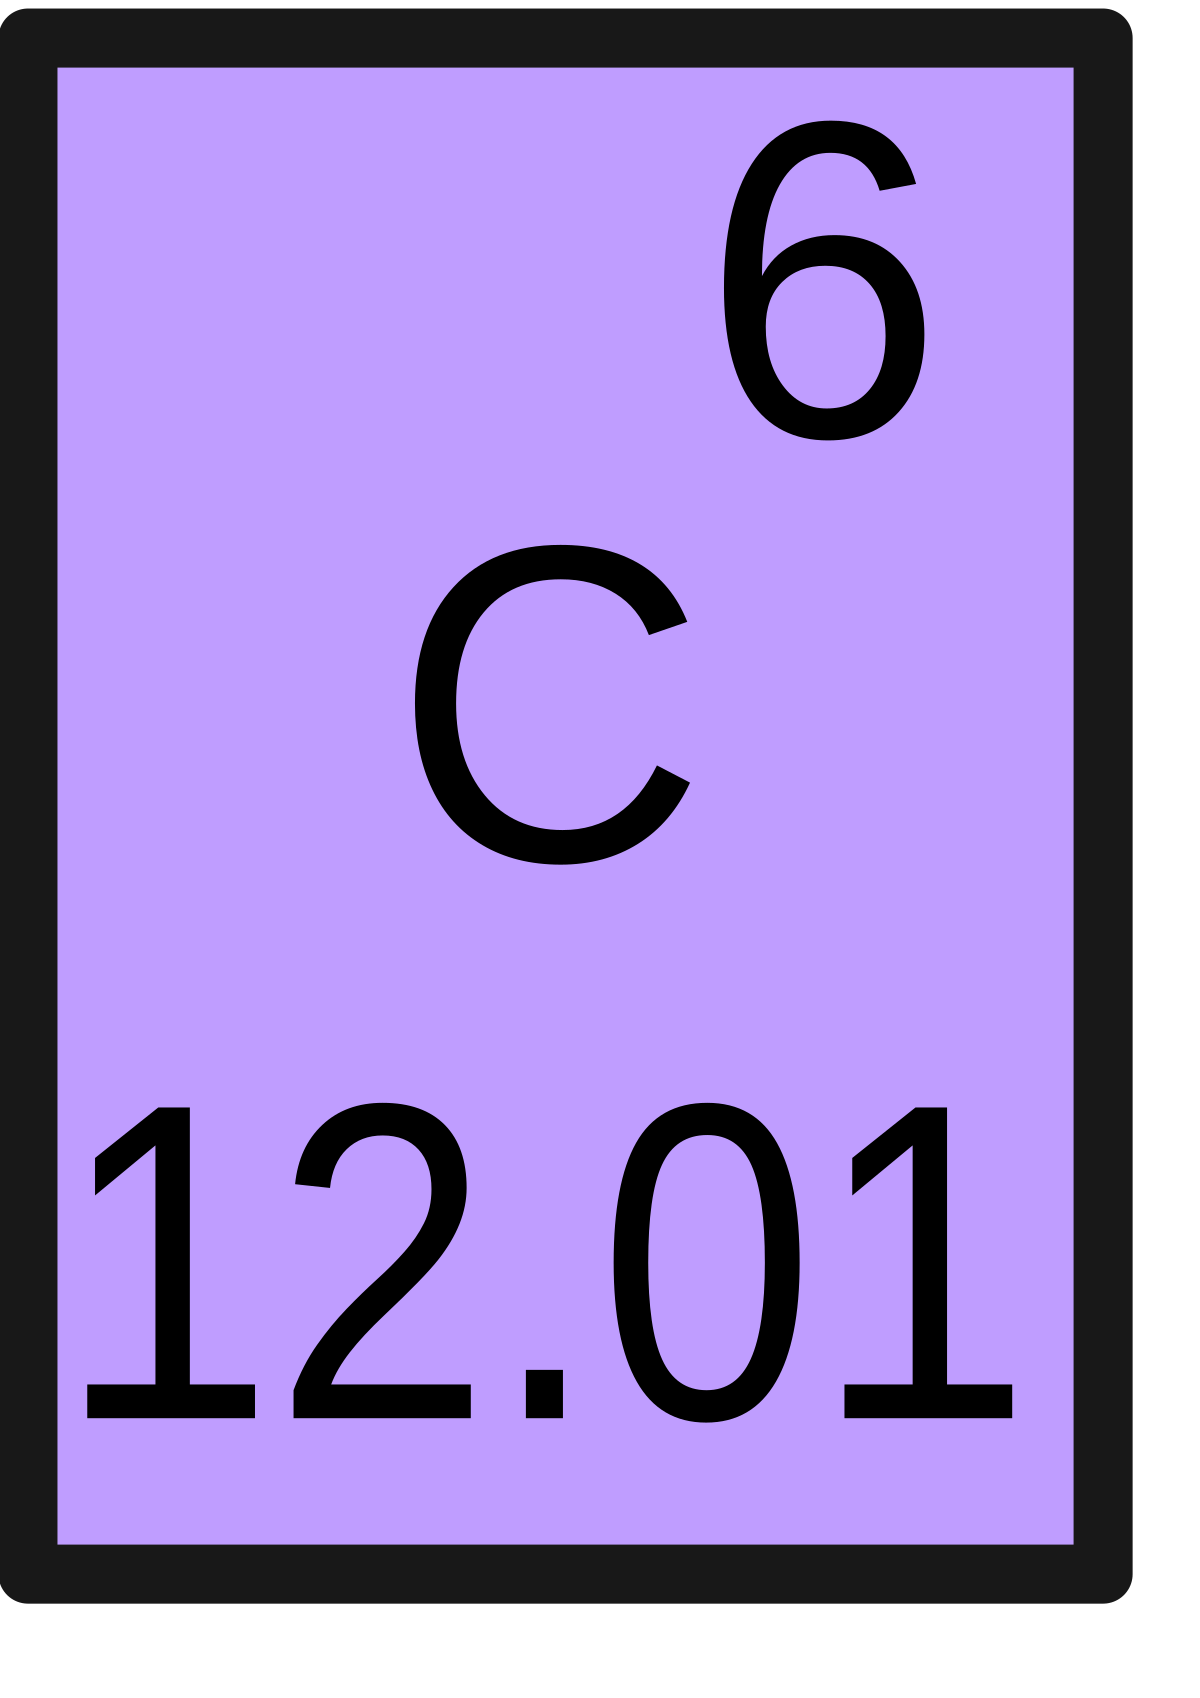 File:Carbon.svg - Wikimedia Commons